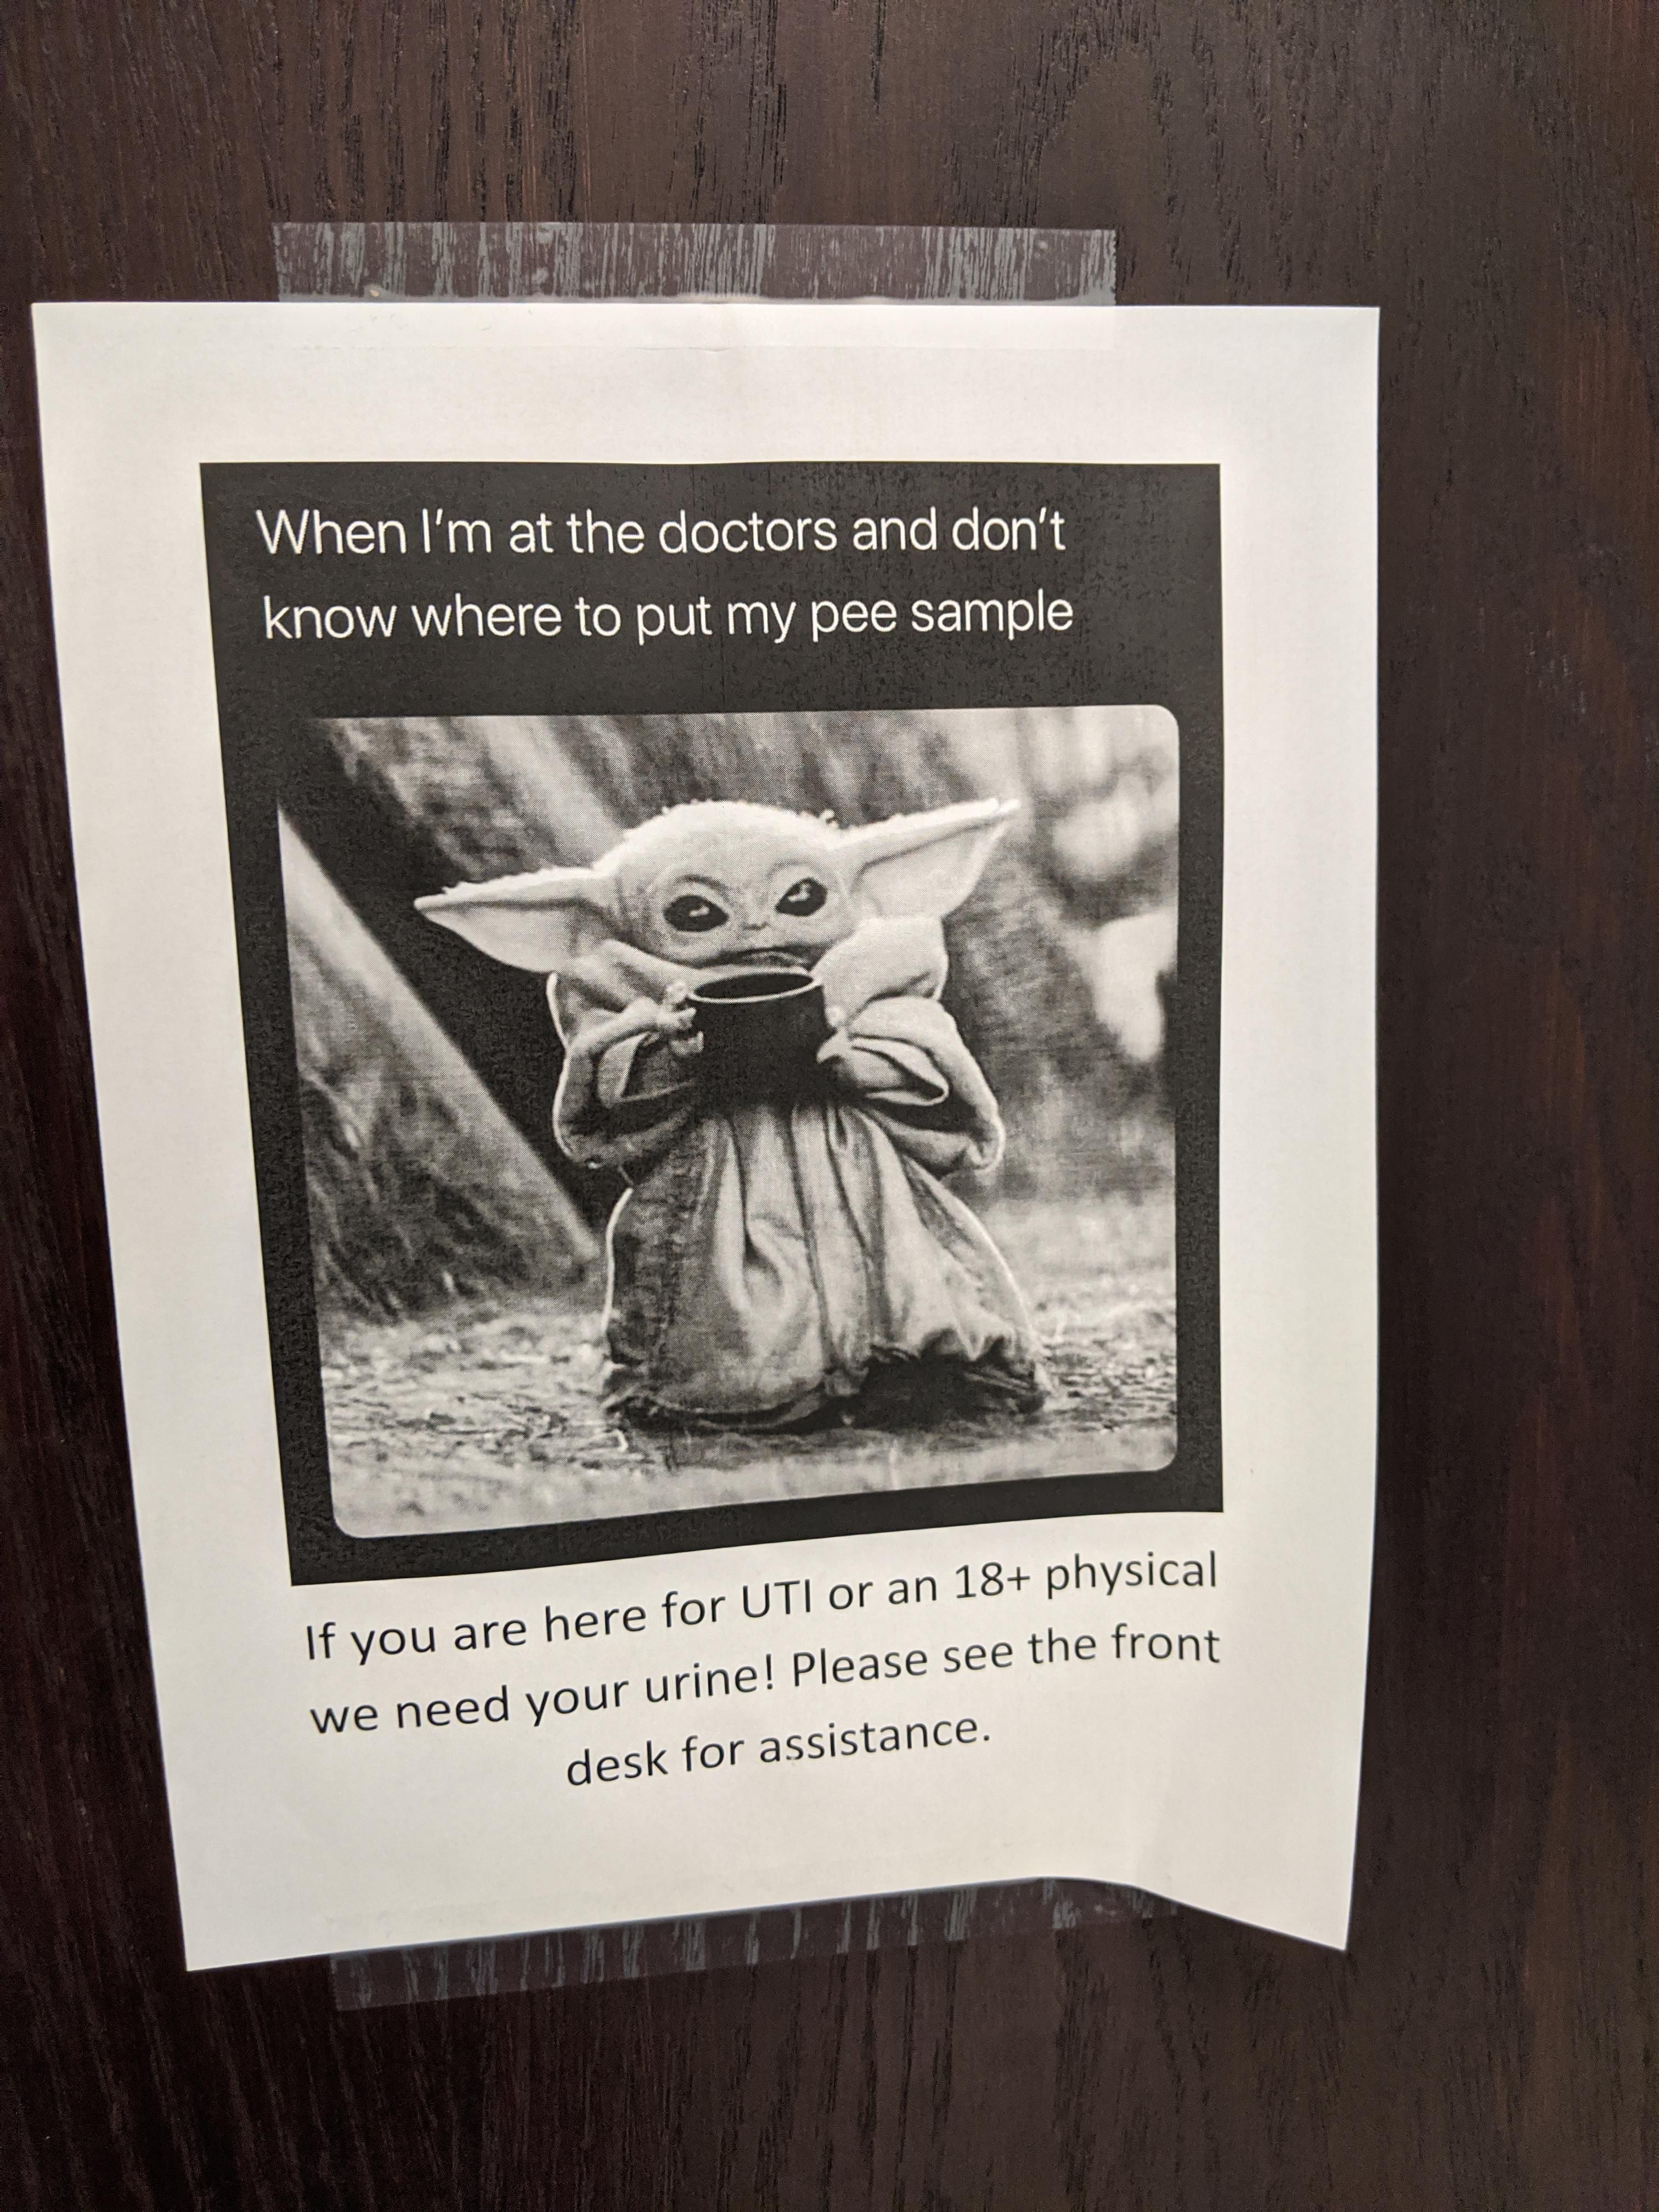 Posted at my local doctor's office